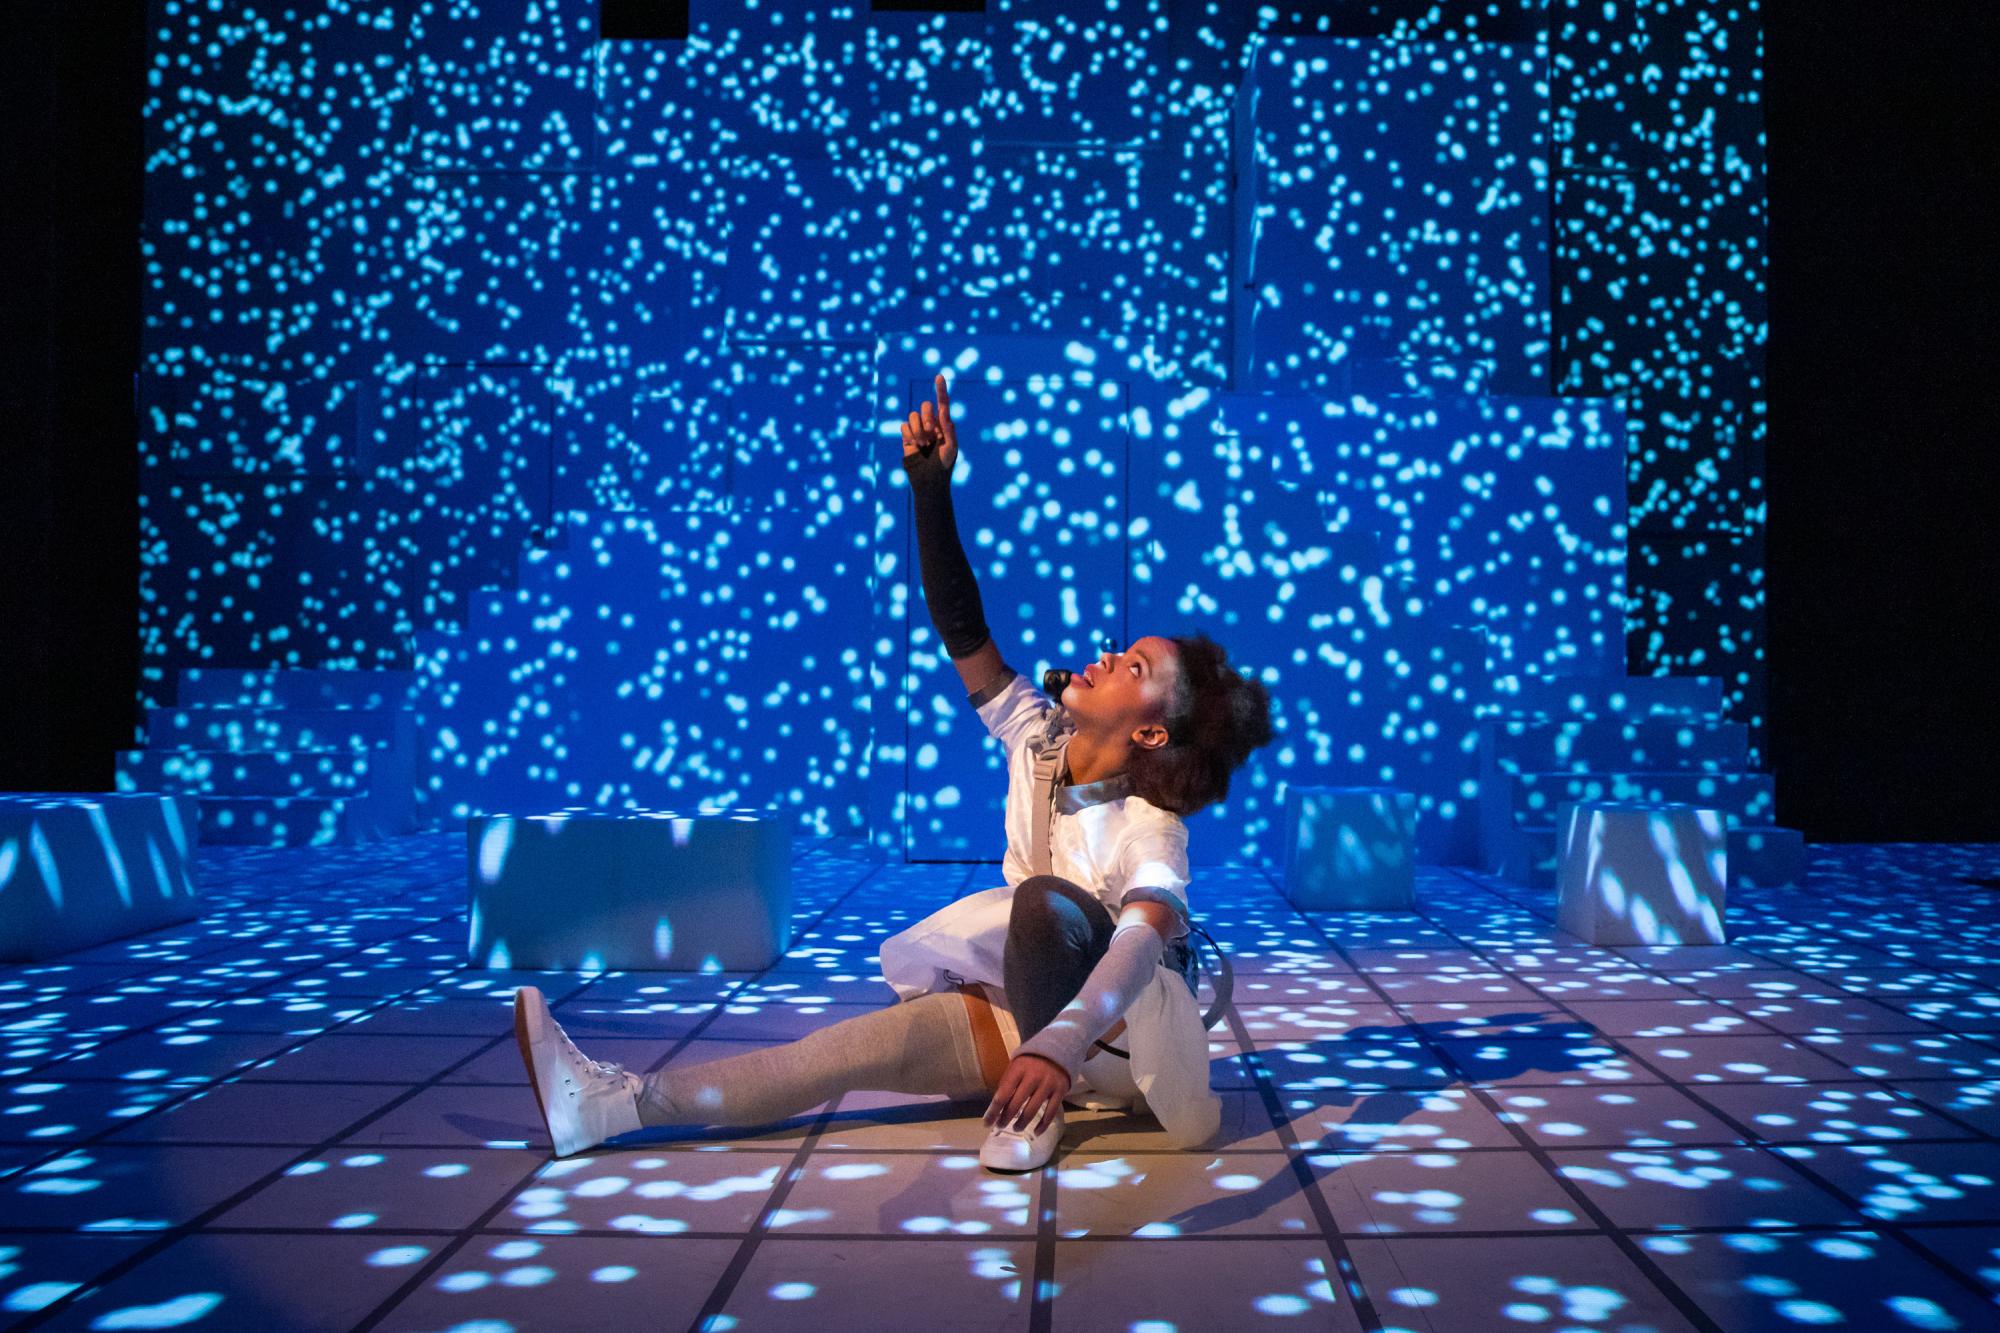 actress sits on a stage with hundreds of stars projected on it, lifting her hand and looking up